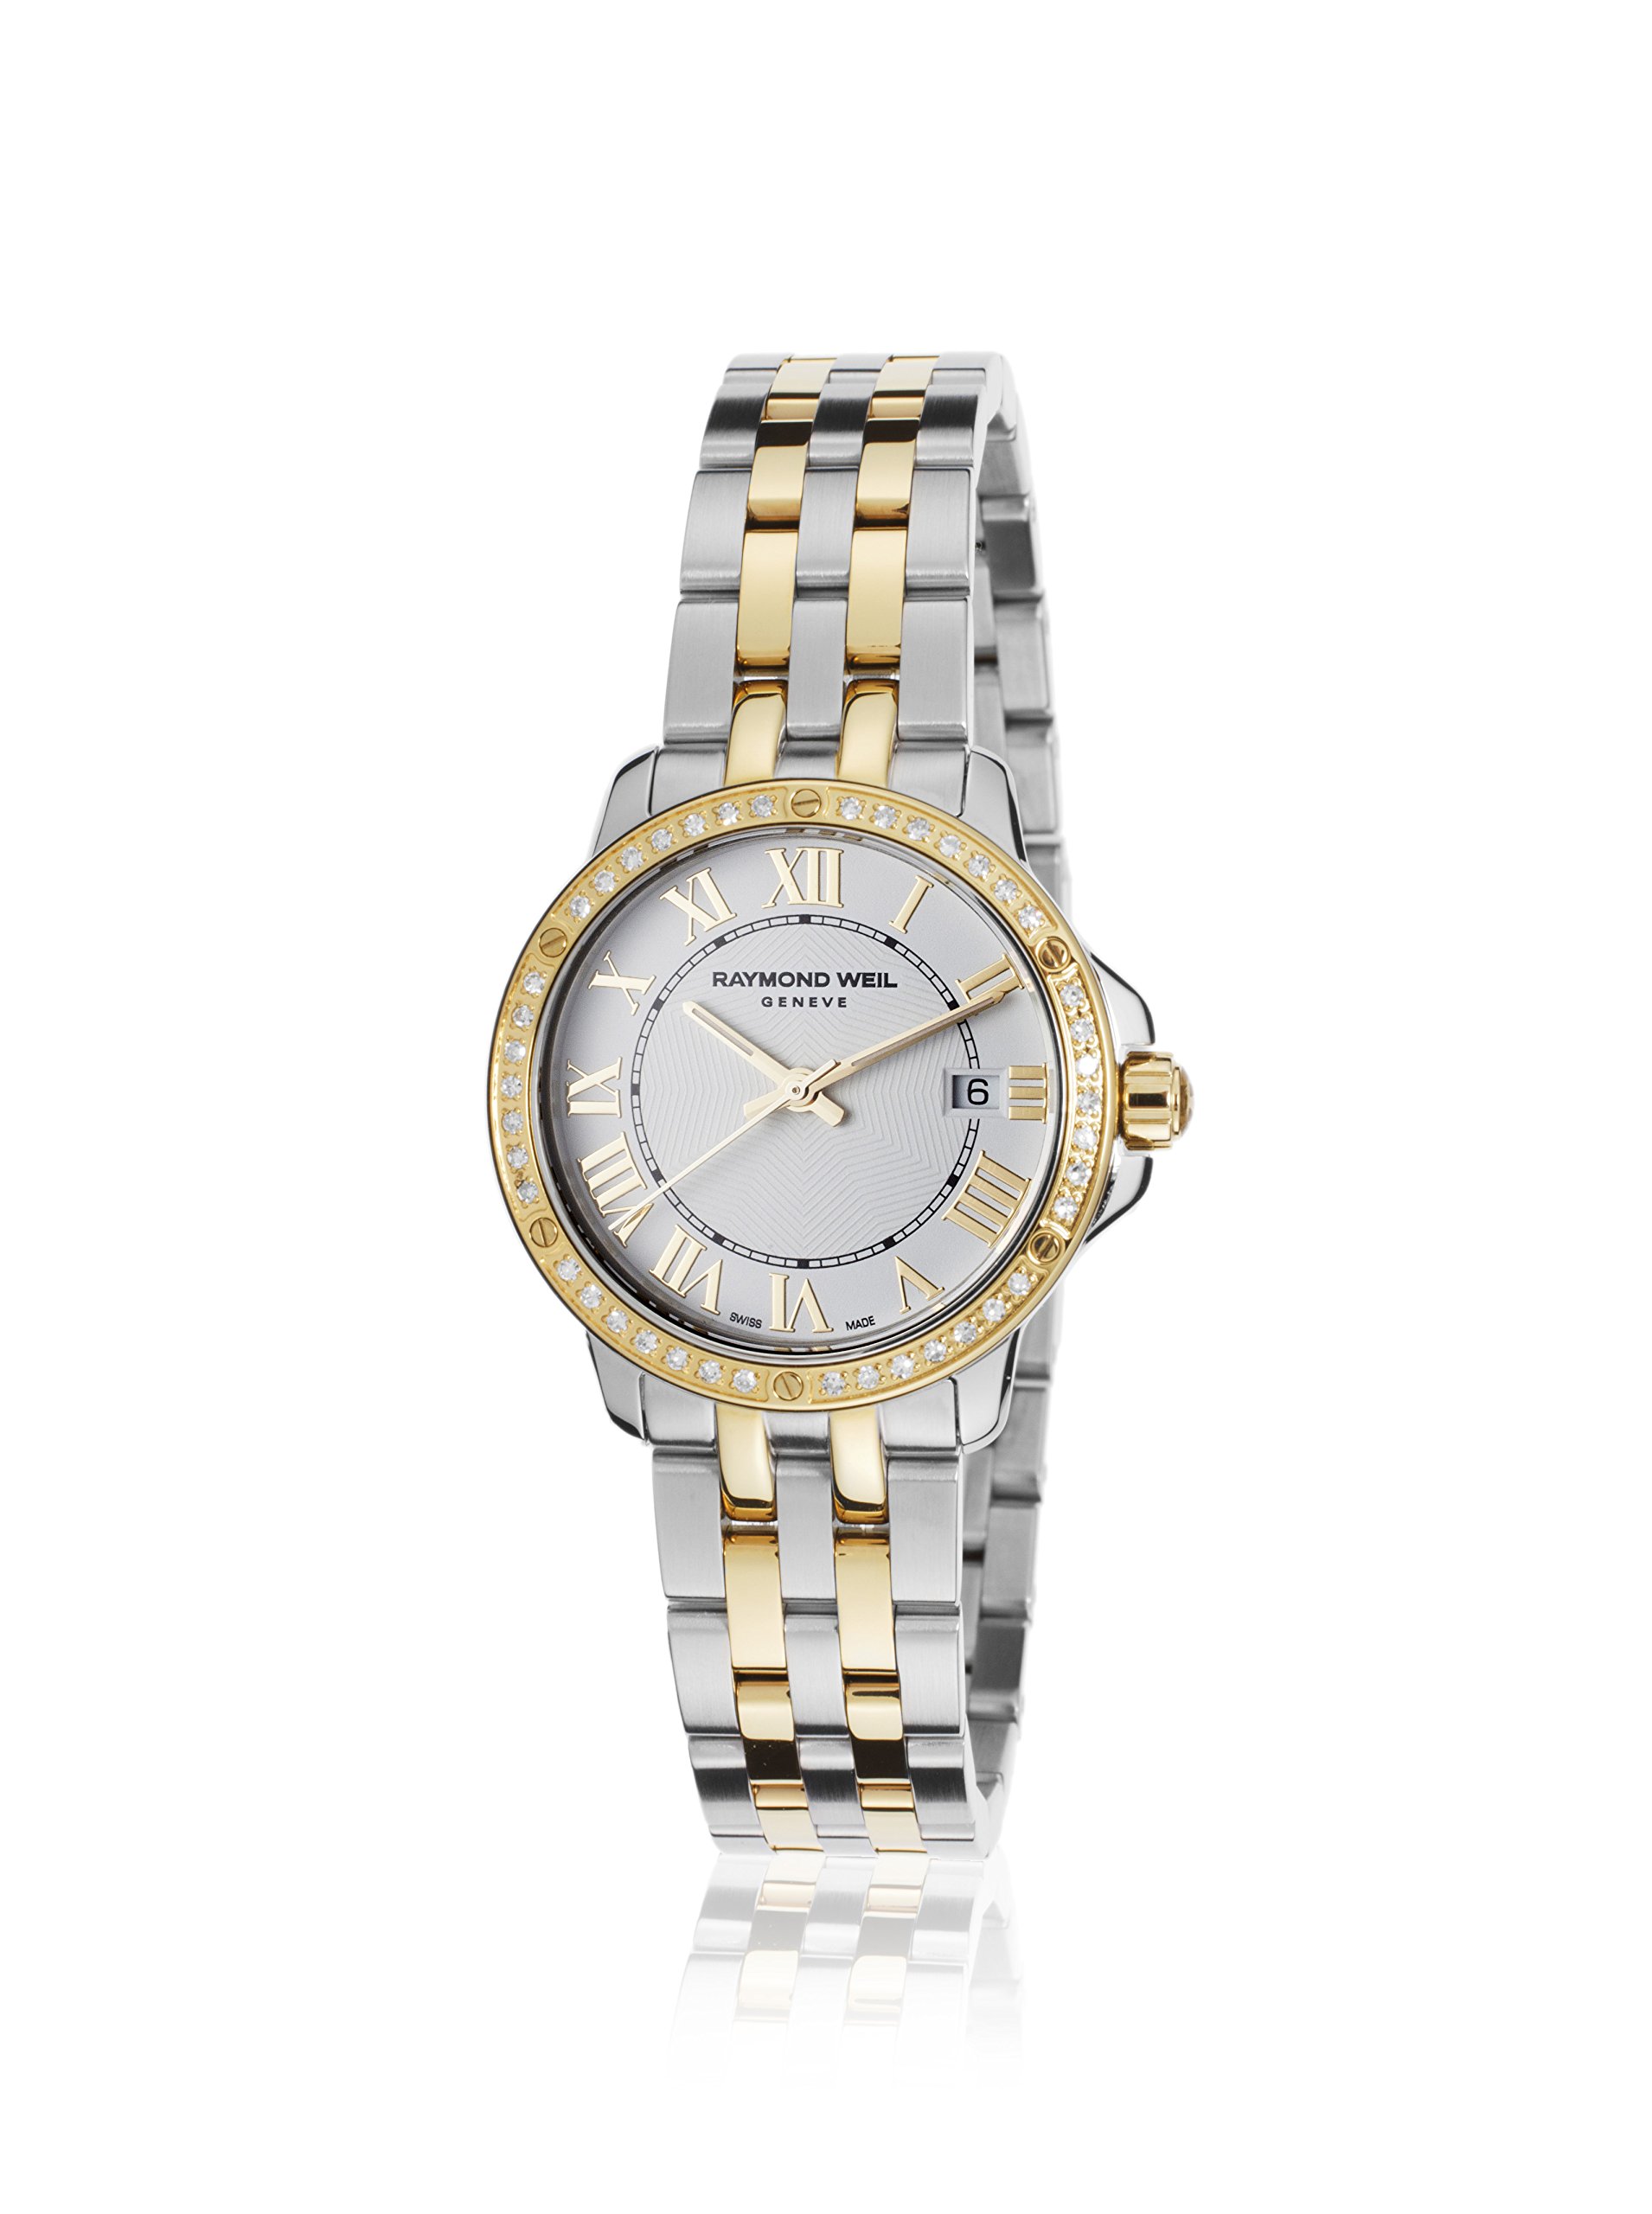 RAYMOND WEIL Women's Tango Textured Mother-of-Pearl Stainless Steel & PVD-Coated Watch